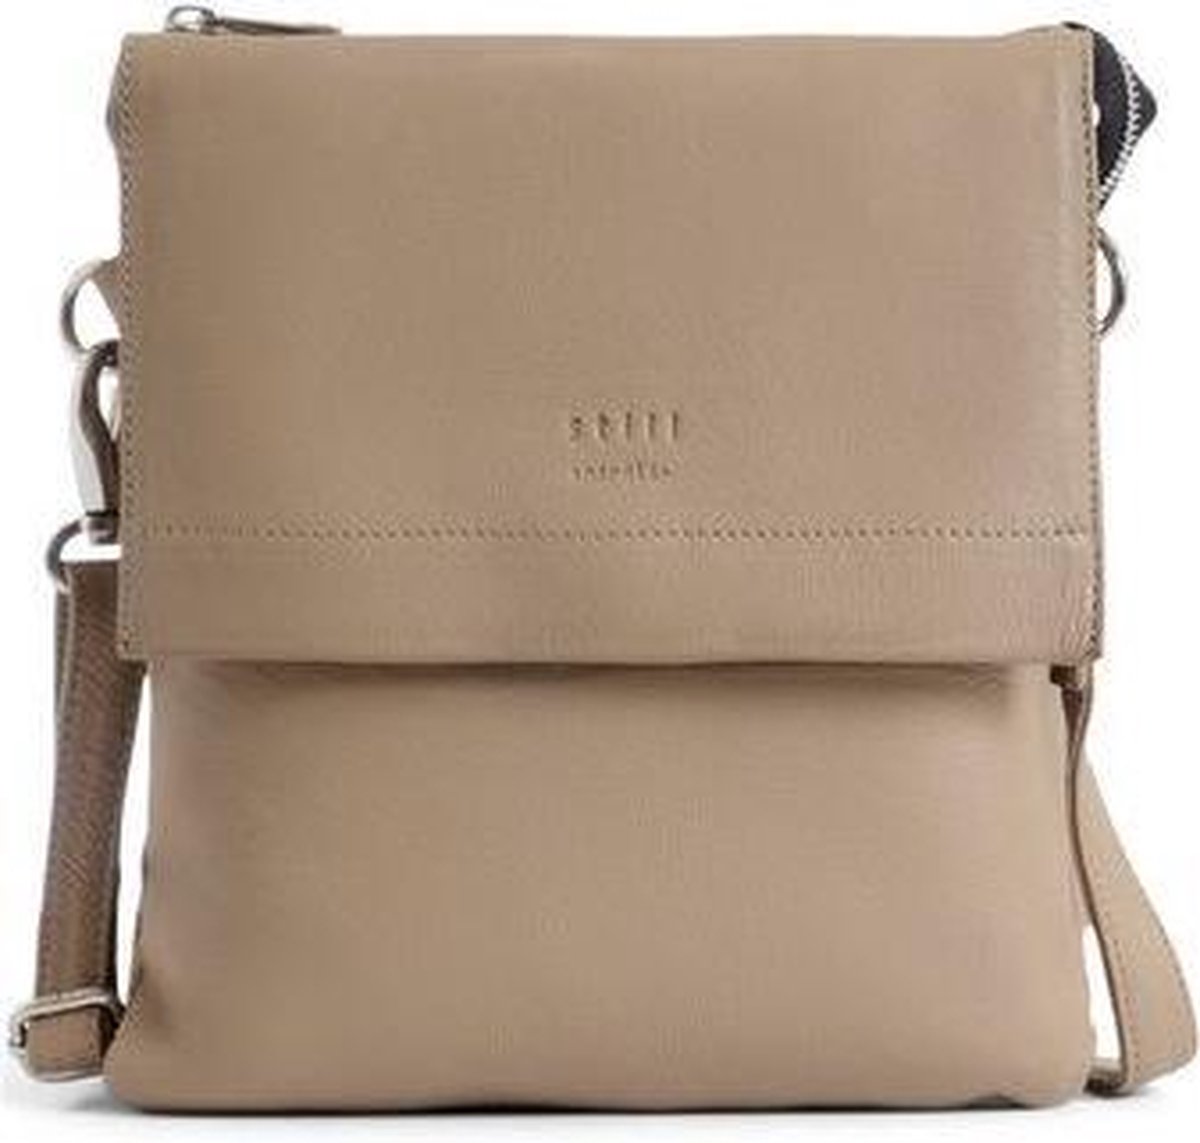 Still Nordic Anouk Small Messenger Taupe